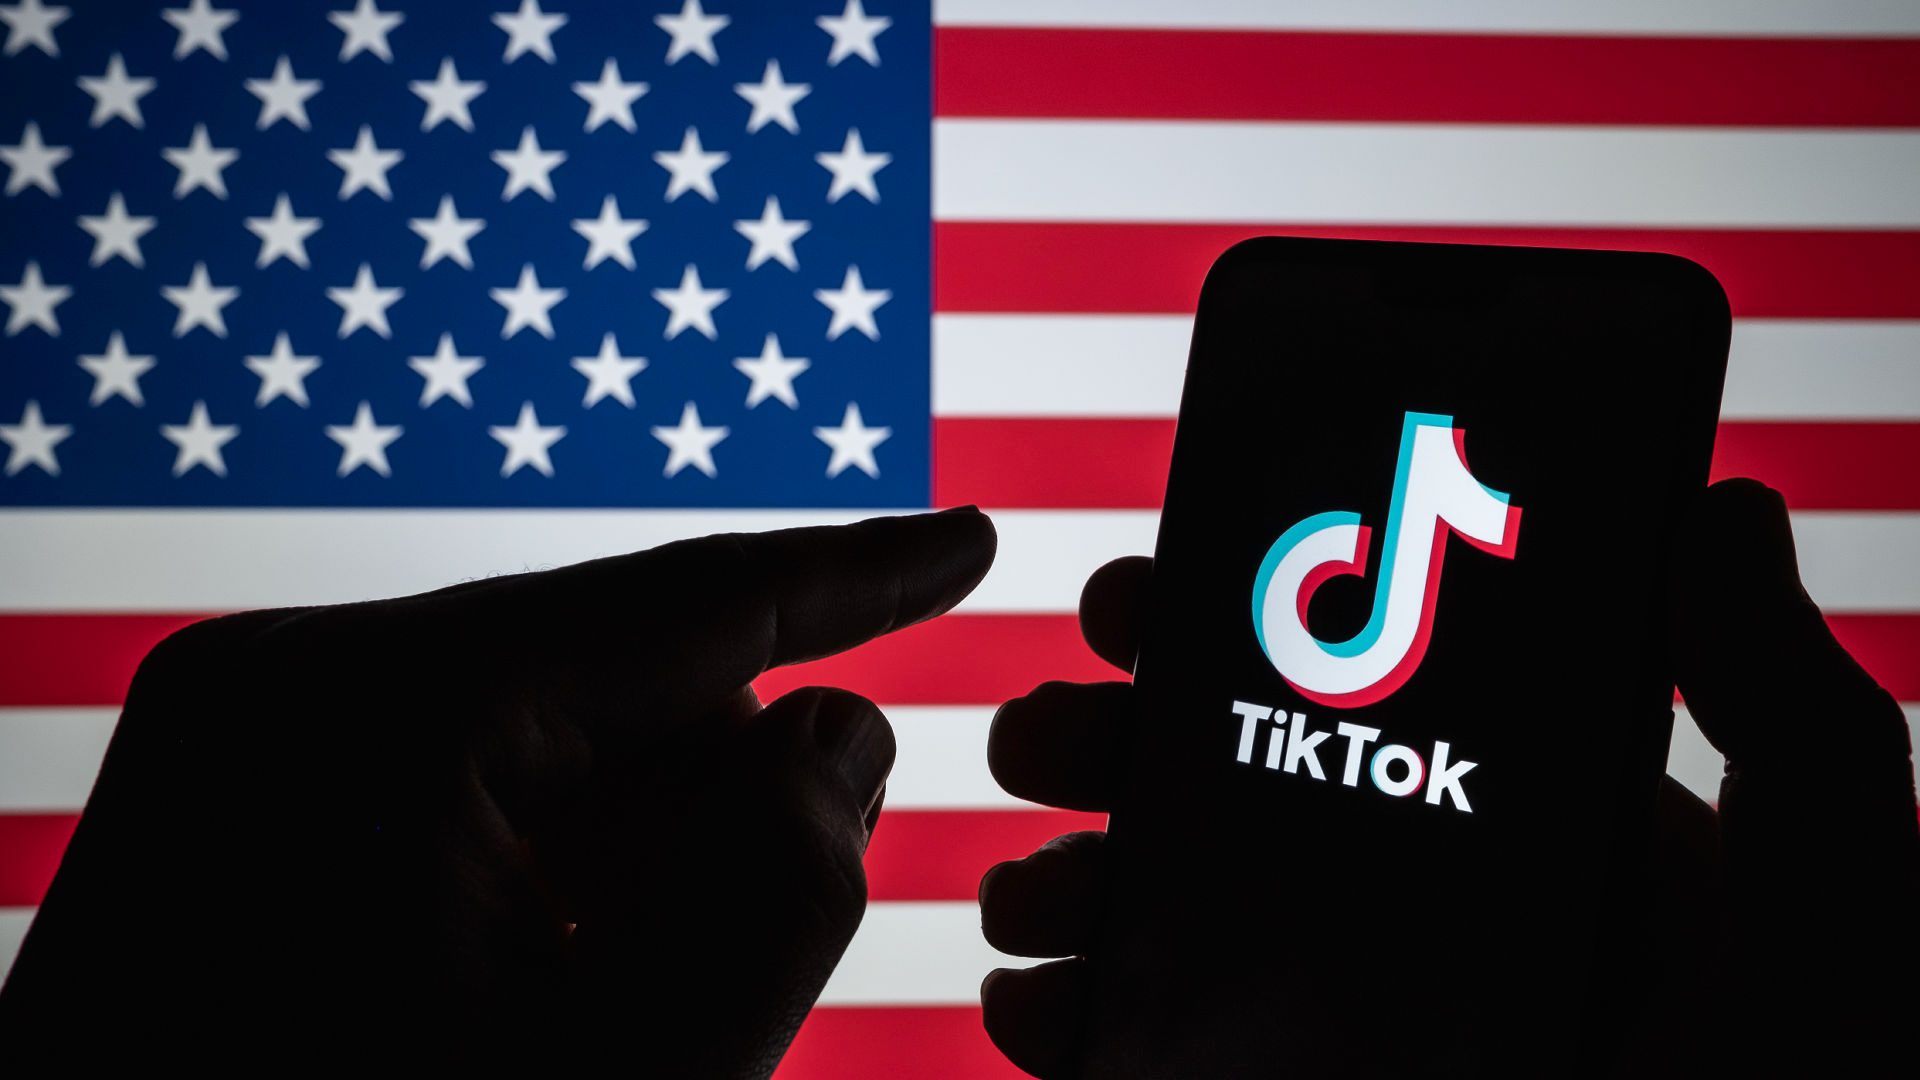 US lawmakers to include ban on TikTok on government devices – sources